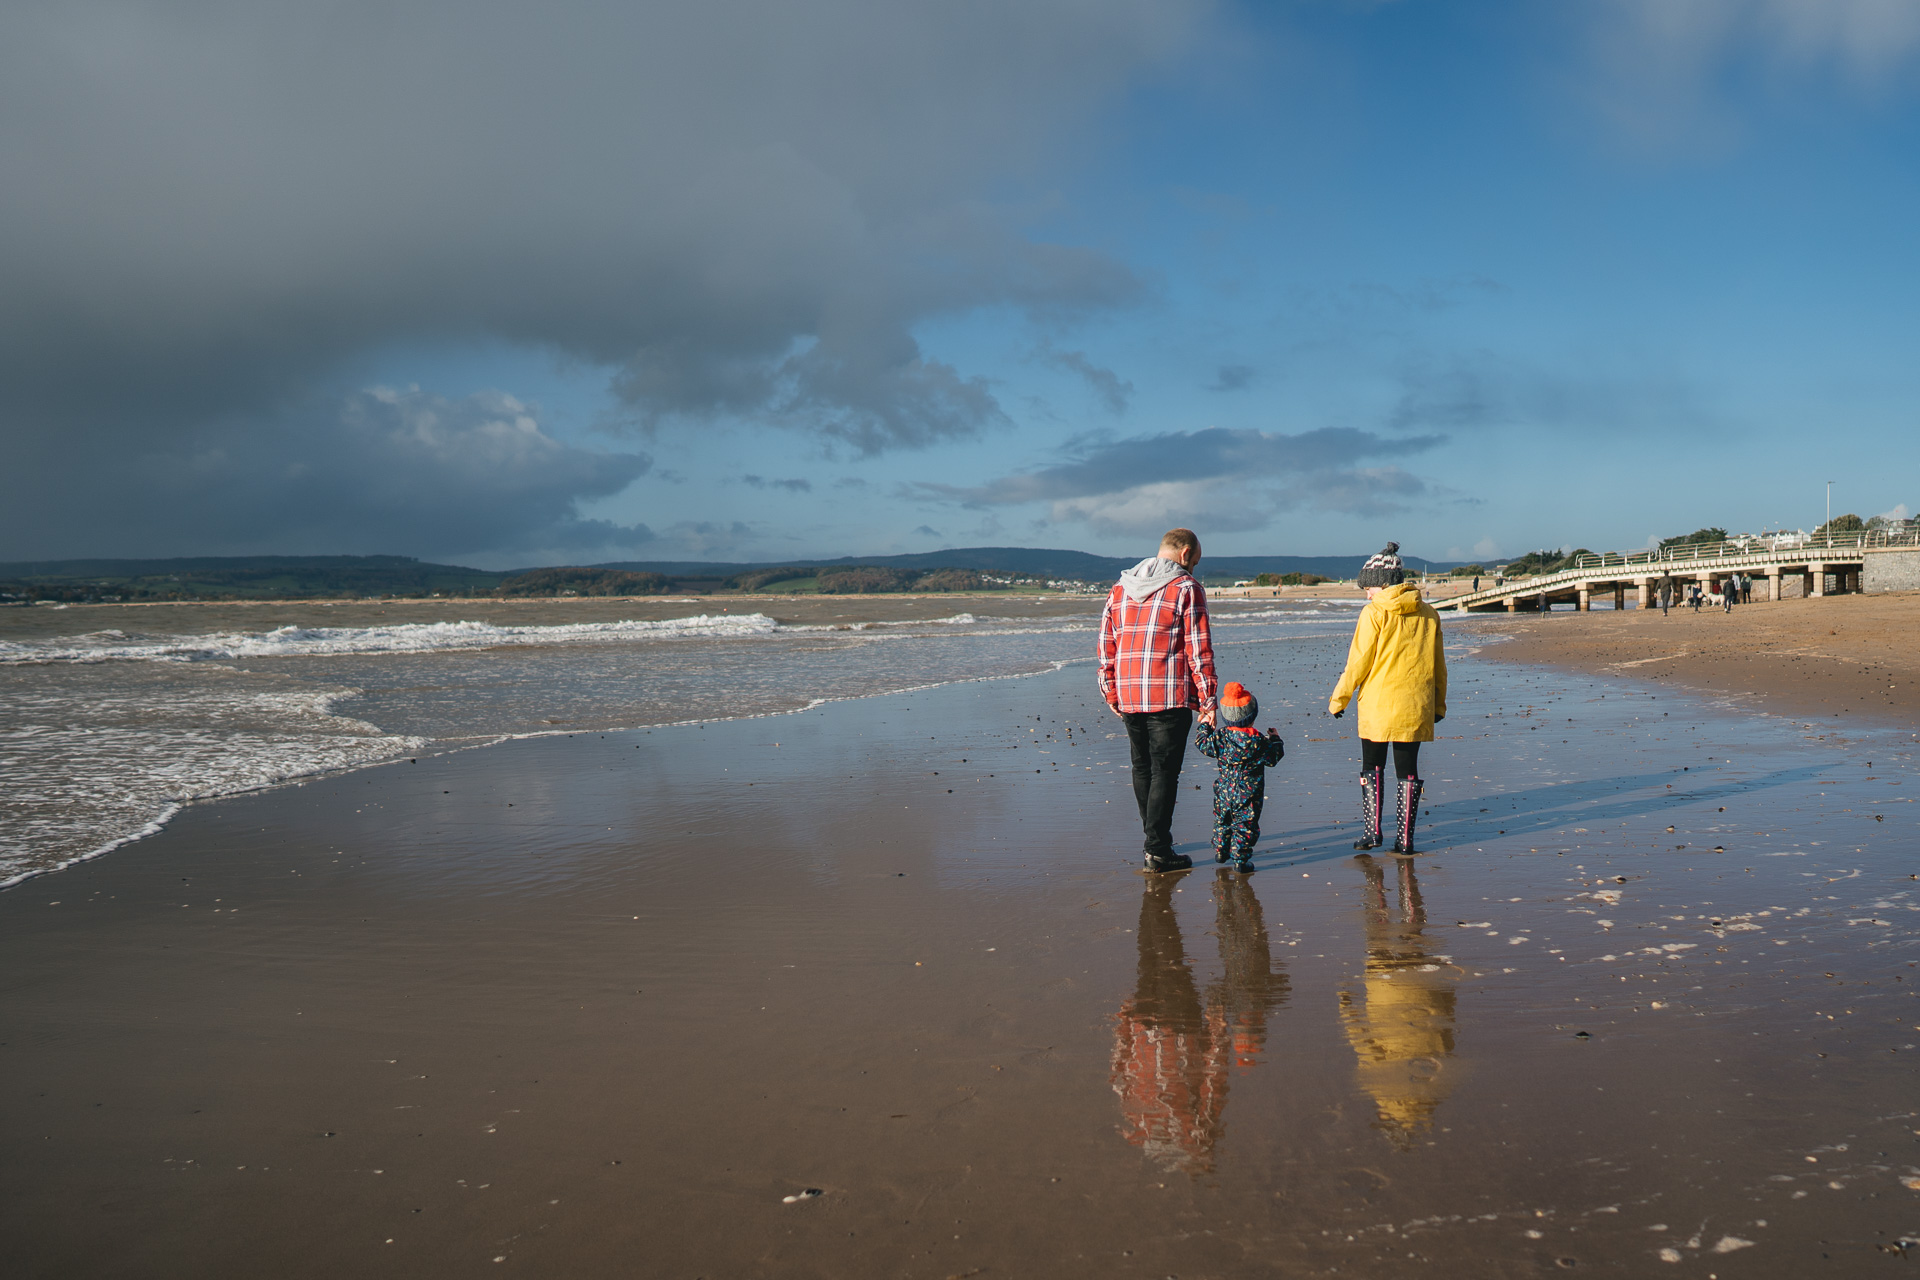 A man, woman and young child walking on a beach together